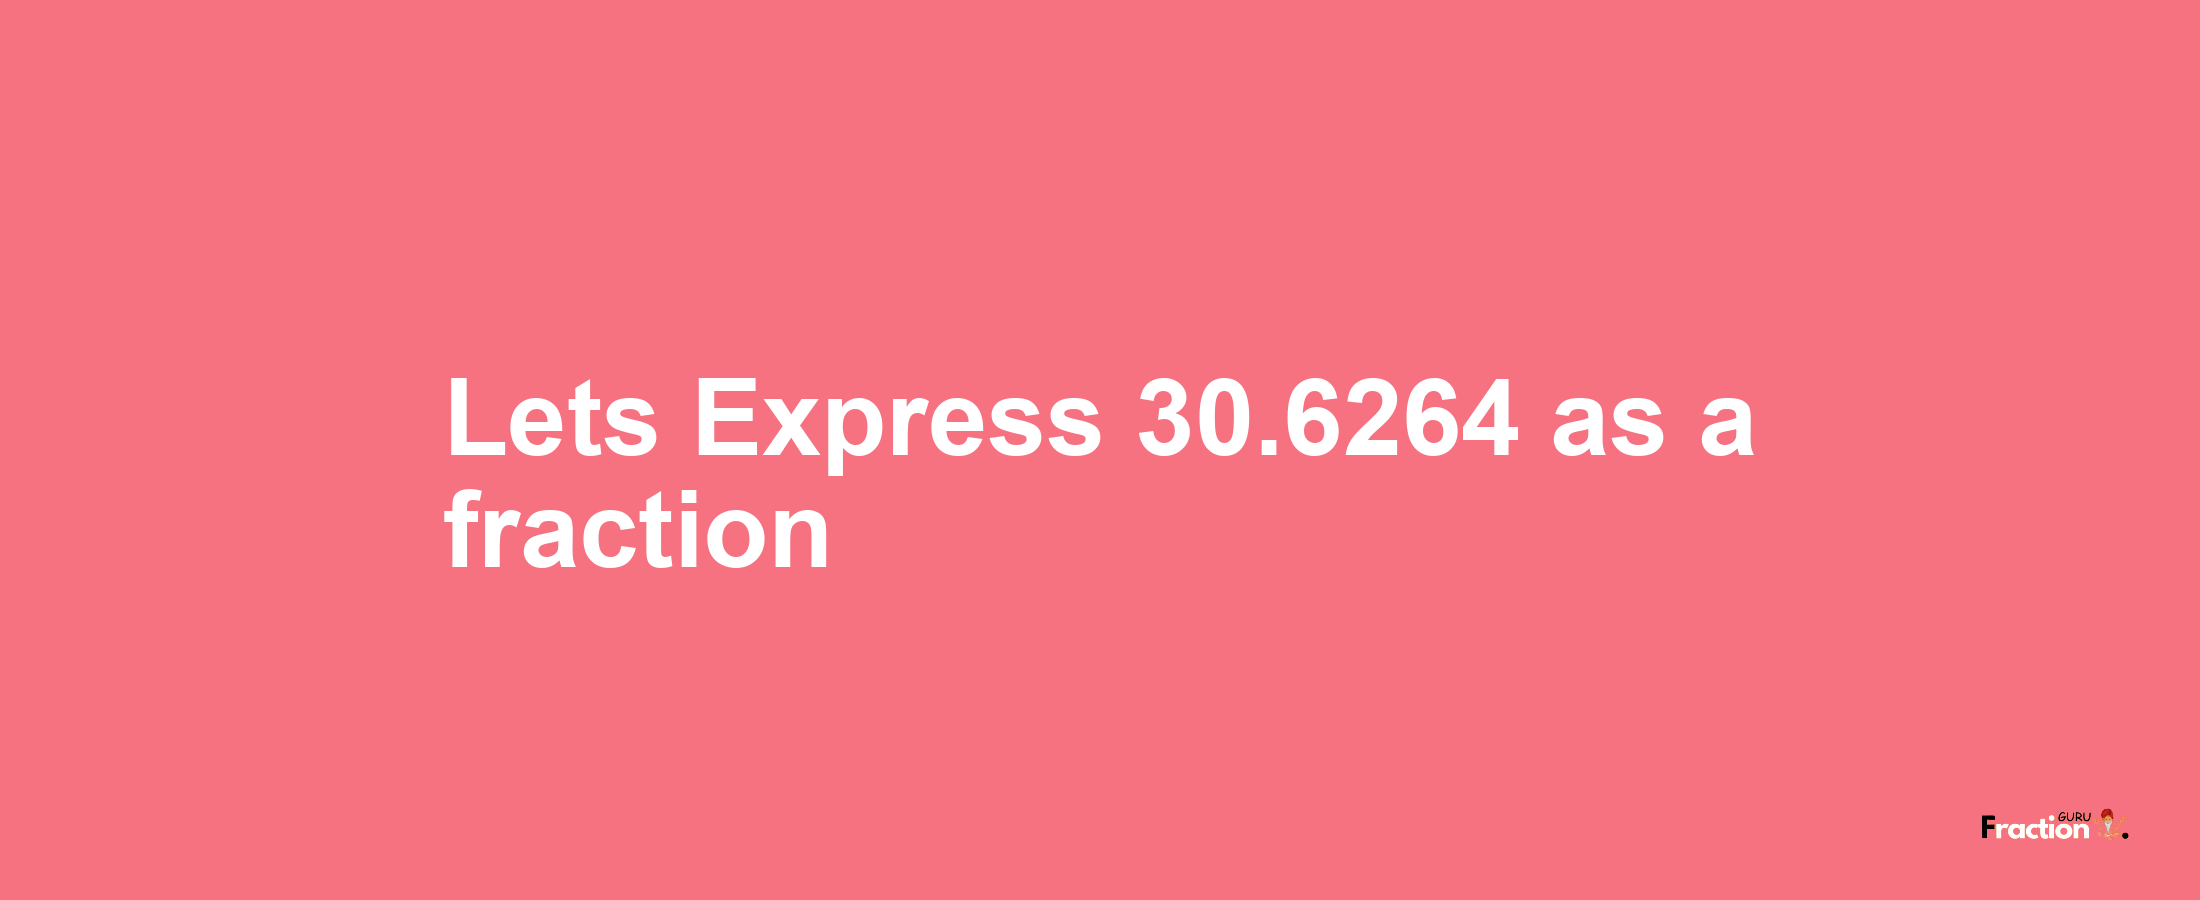 Lets Express 30.6264 as afraction